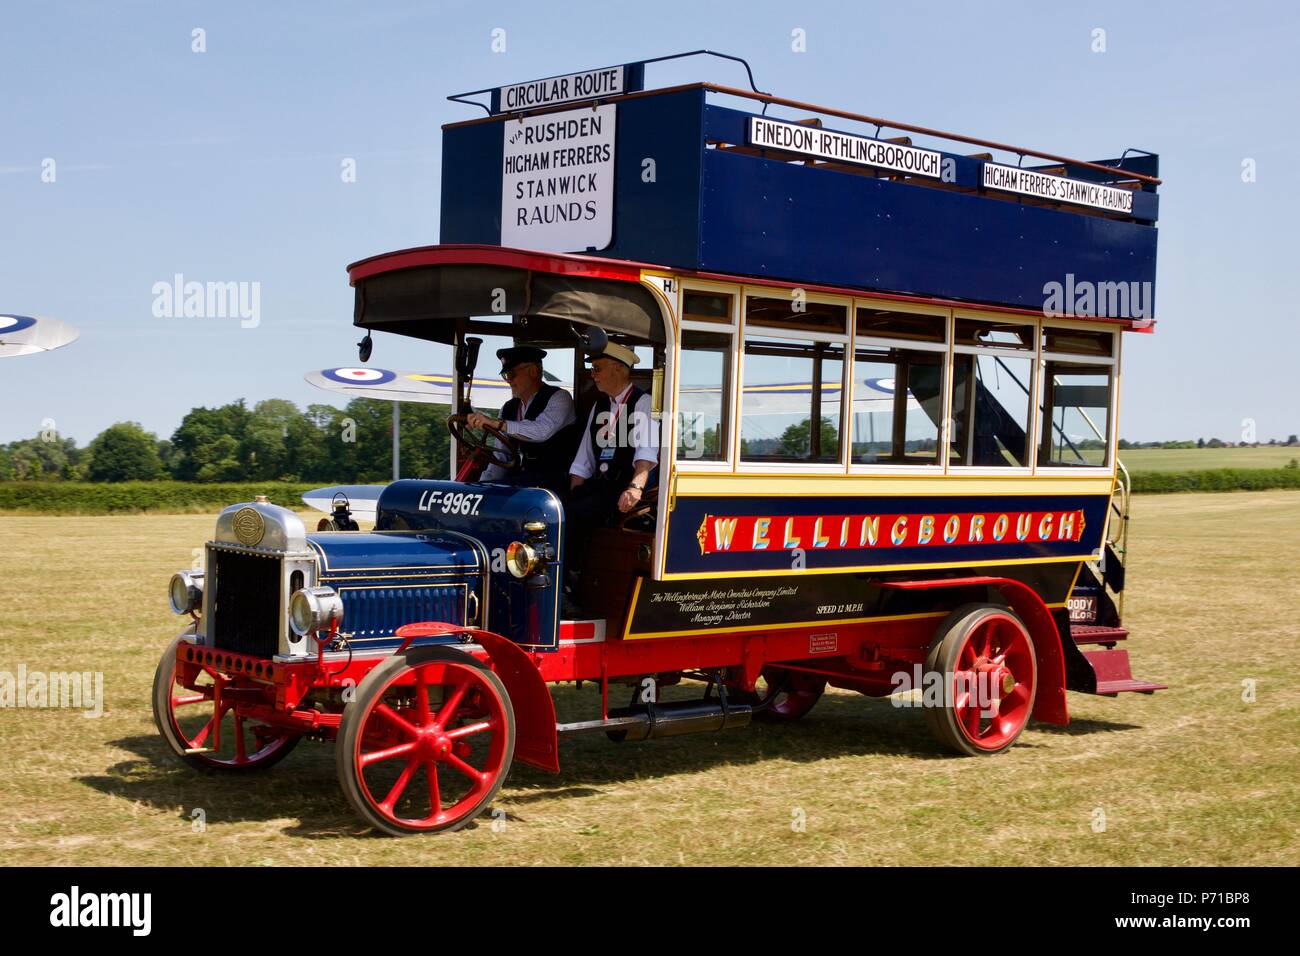 1913 Wellingborough Leyland ST double-decker bus at Old Warden Stock Photo